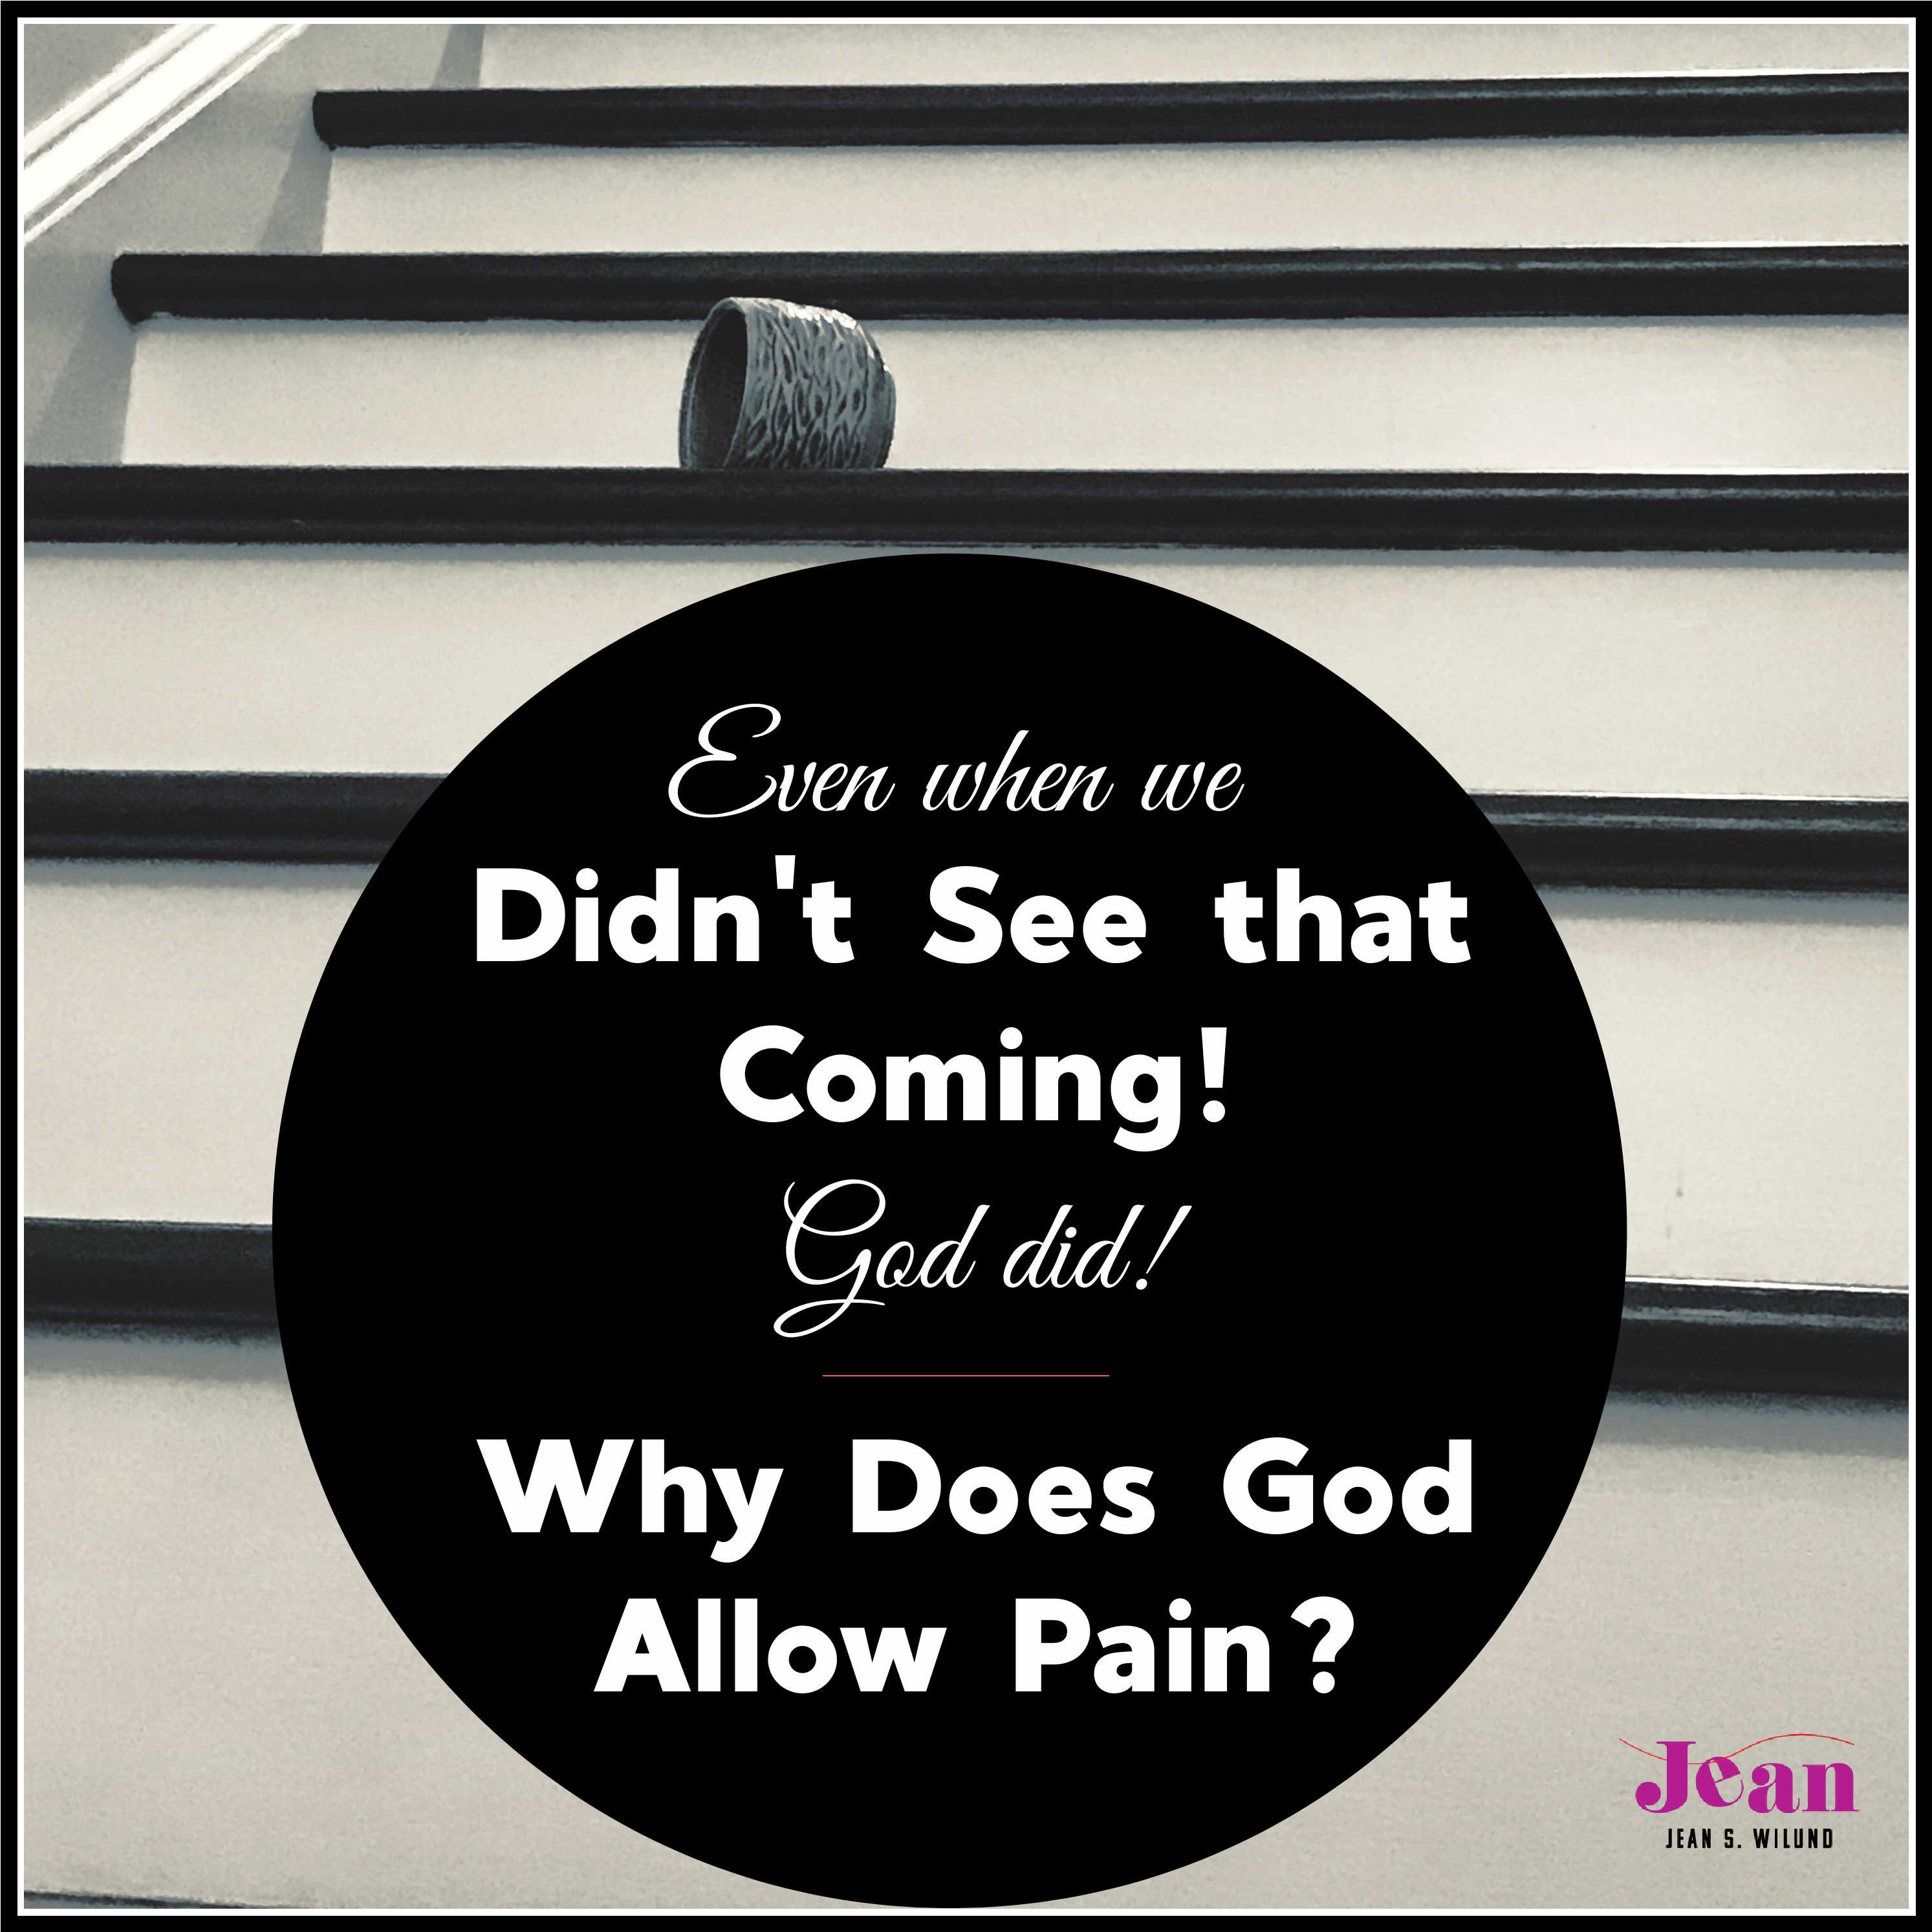 Why Does God Allow Pain? — A Story From the Didn’t See That Coming! Files